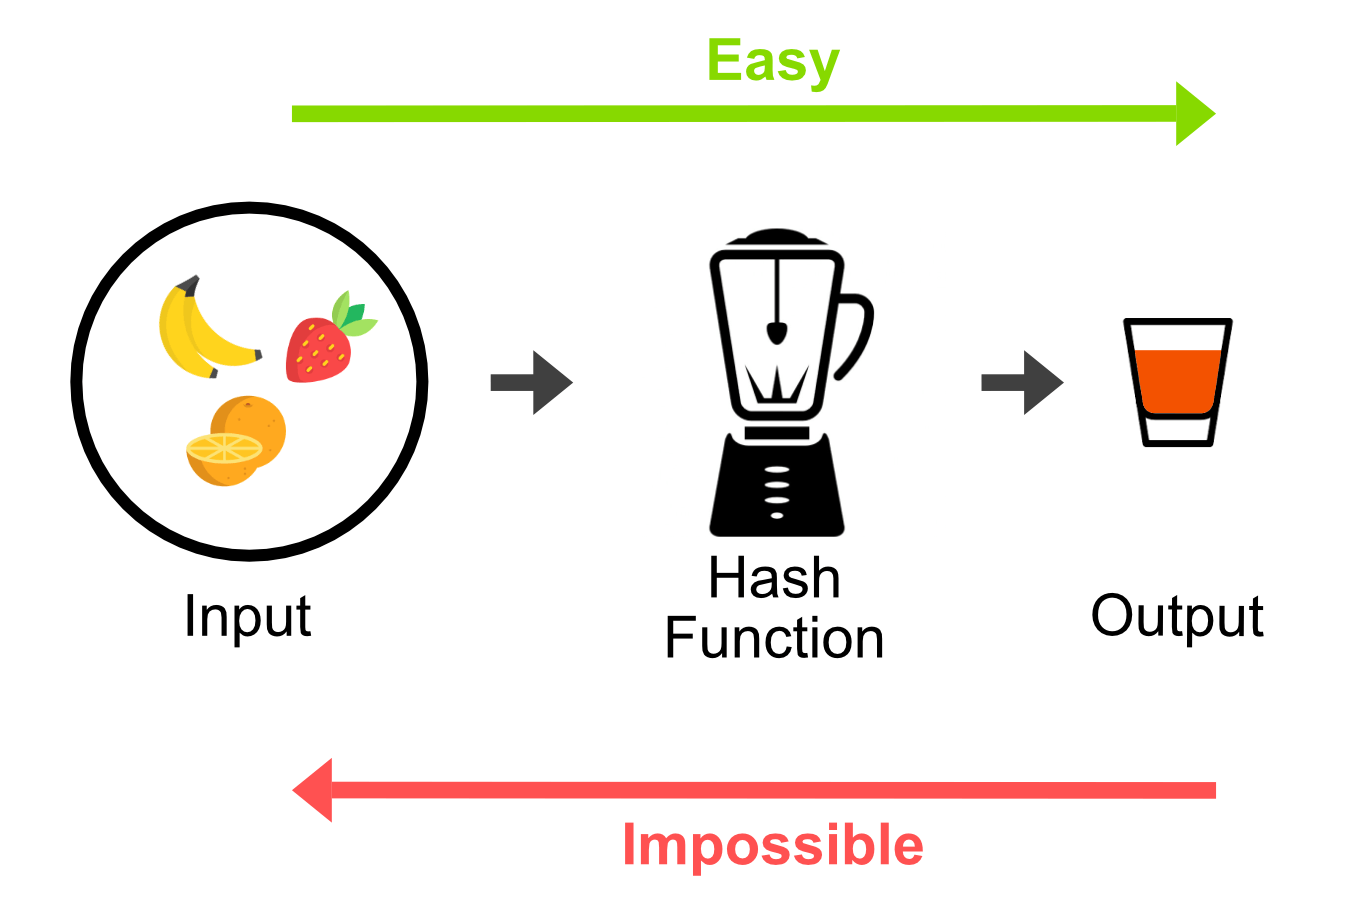 Diagram showing that you can turn fruit into a smoothie, but you can't turn a smoothie back into the original fruit. ~ Image by Julien Piatek.